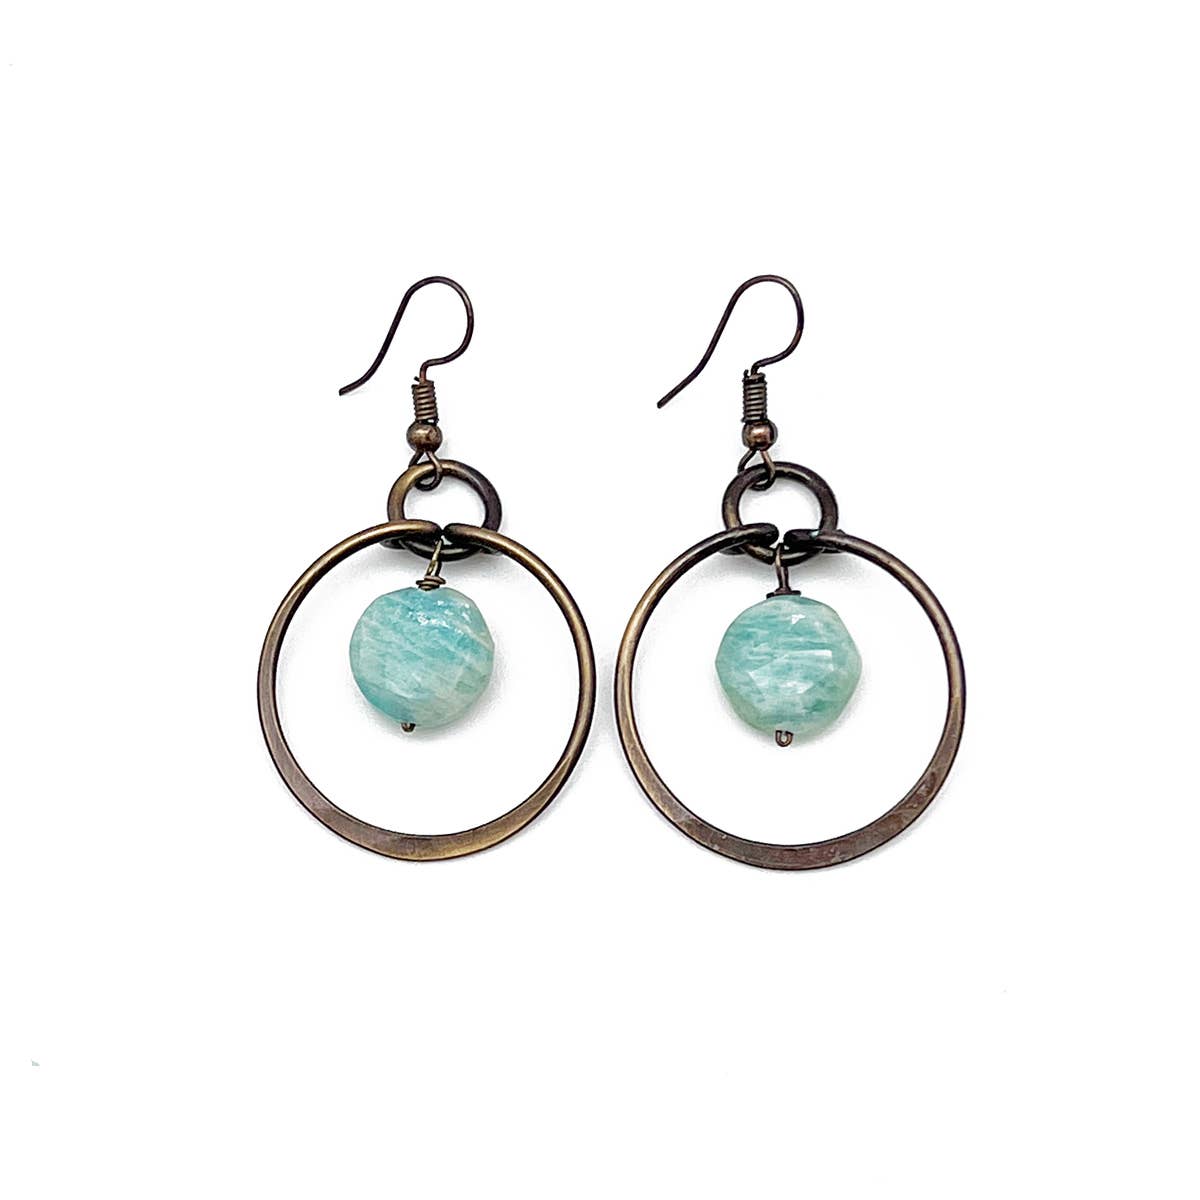 Banjara Collection Earrings - Brass Rings and Amazonite